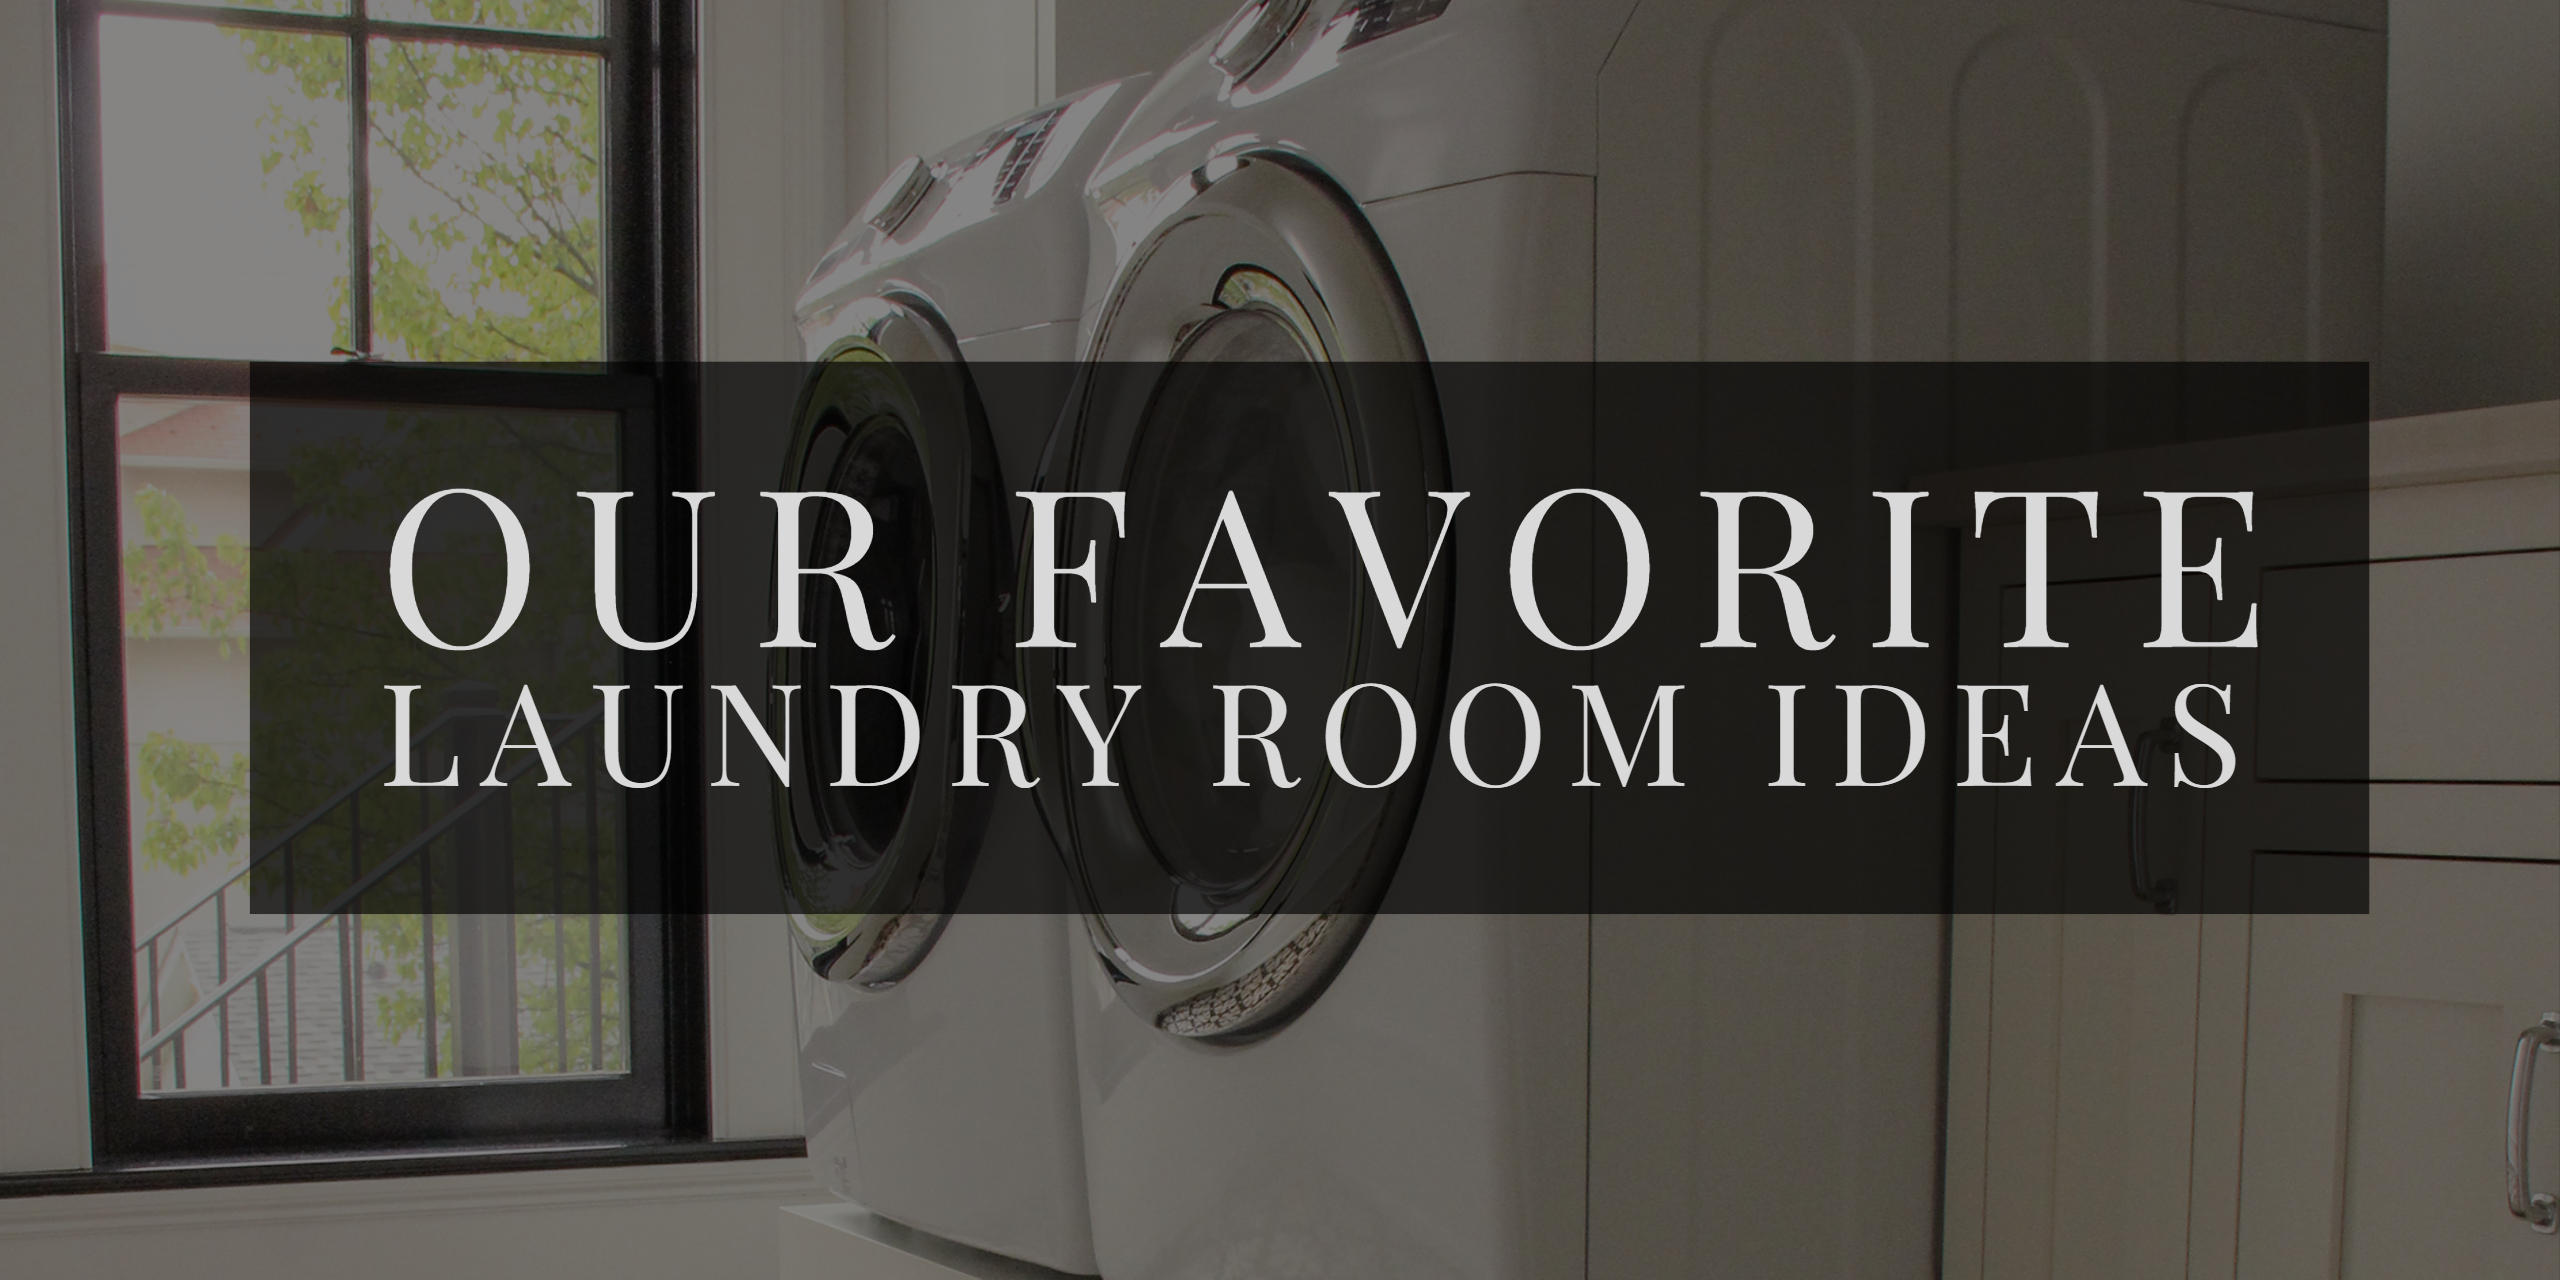 Our Favorite Laundry Room Ideas